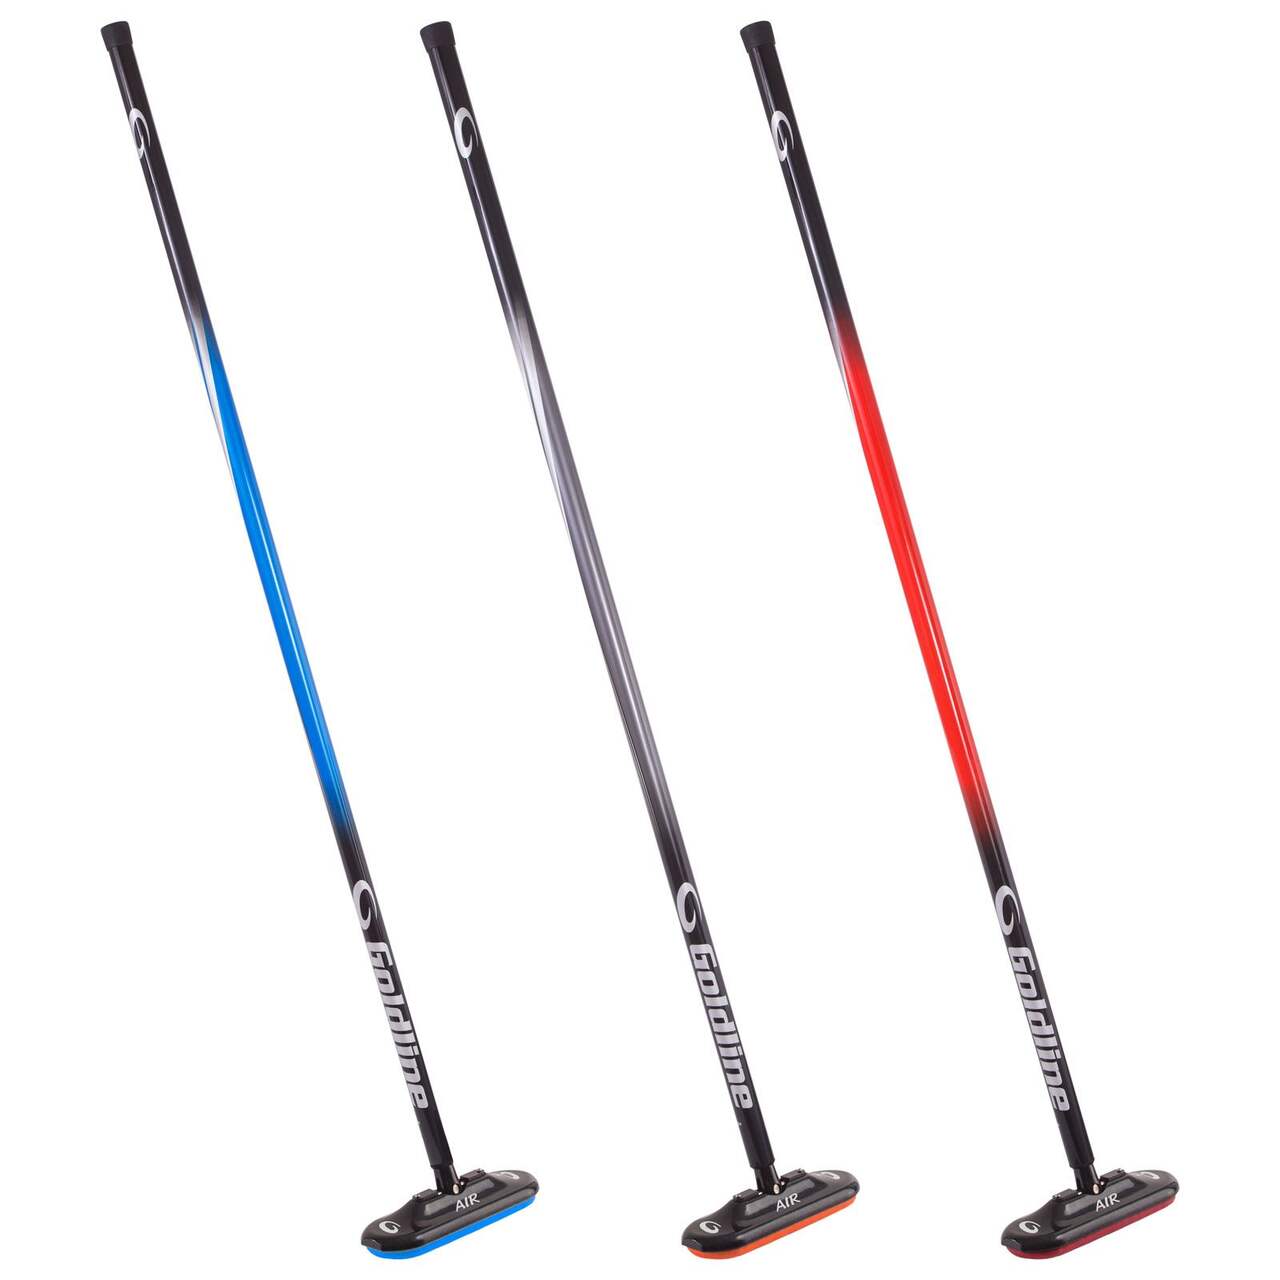 https://media-www.canadiantire.ca/product/playing/team-sports-and-golf/sports-equipment-accessories/1840058/broom-fg-360-air-1-1-8-blue-e9e2e8f8-faf8-48bf-81d2-bb4192b7c2f6-jpgrendition.jpg?imdensity=1&imwidth=640&impolicy=mZoom